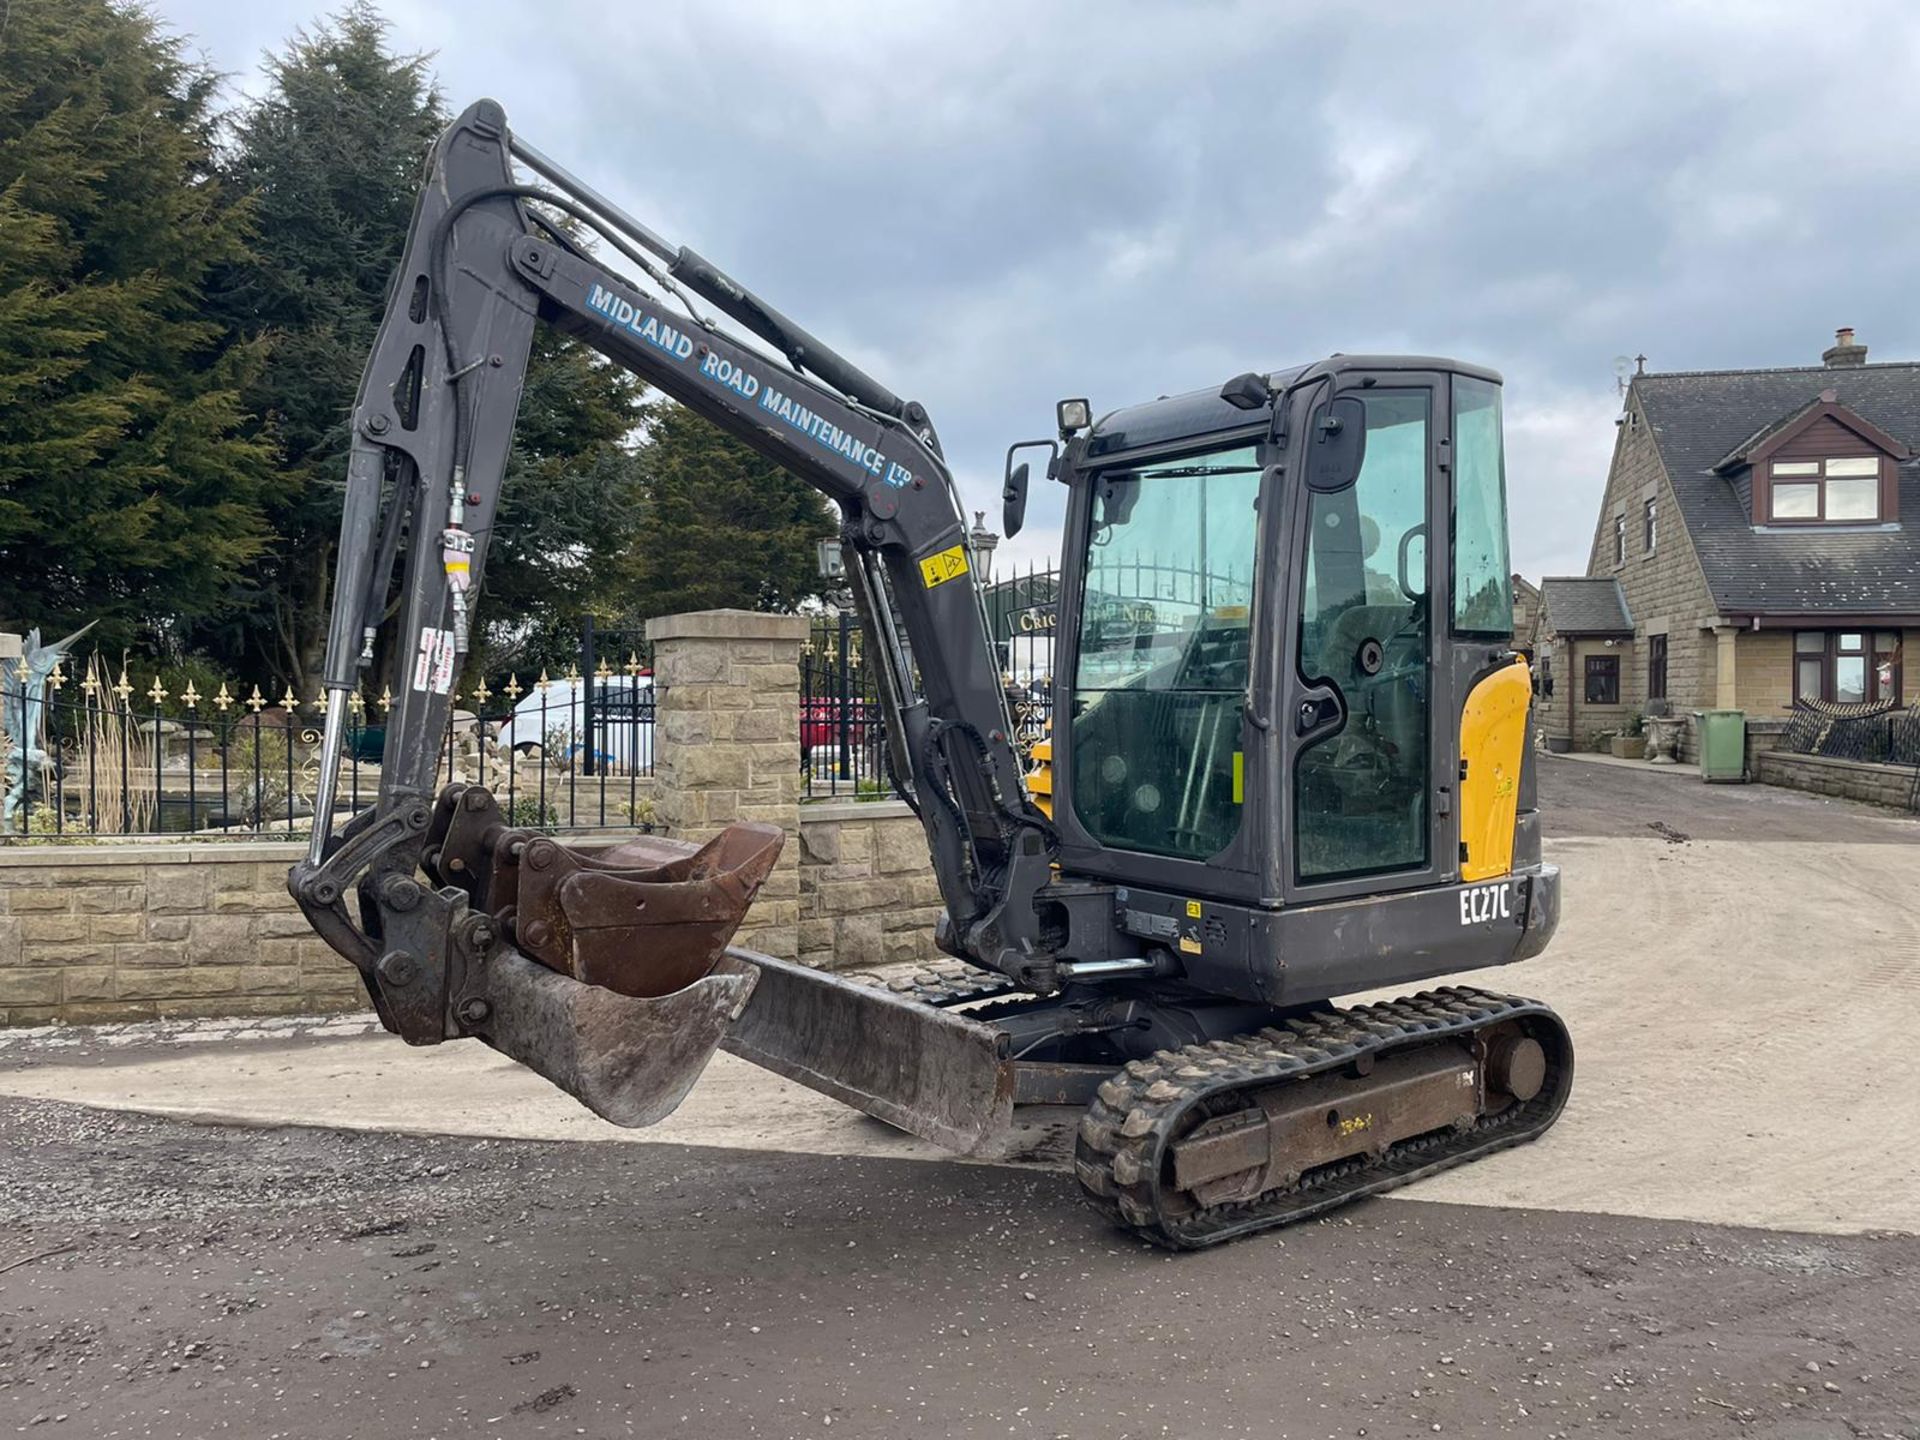 2013 VOLVO EC27C EXCAVATOR RUNS, DRIVES AND DIGS, IN USED BUT GOOD CONDITION, X3 BUCKETS INCLUDED - Image 2 of 8